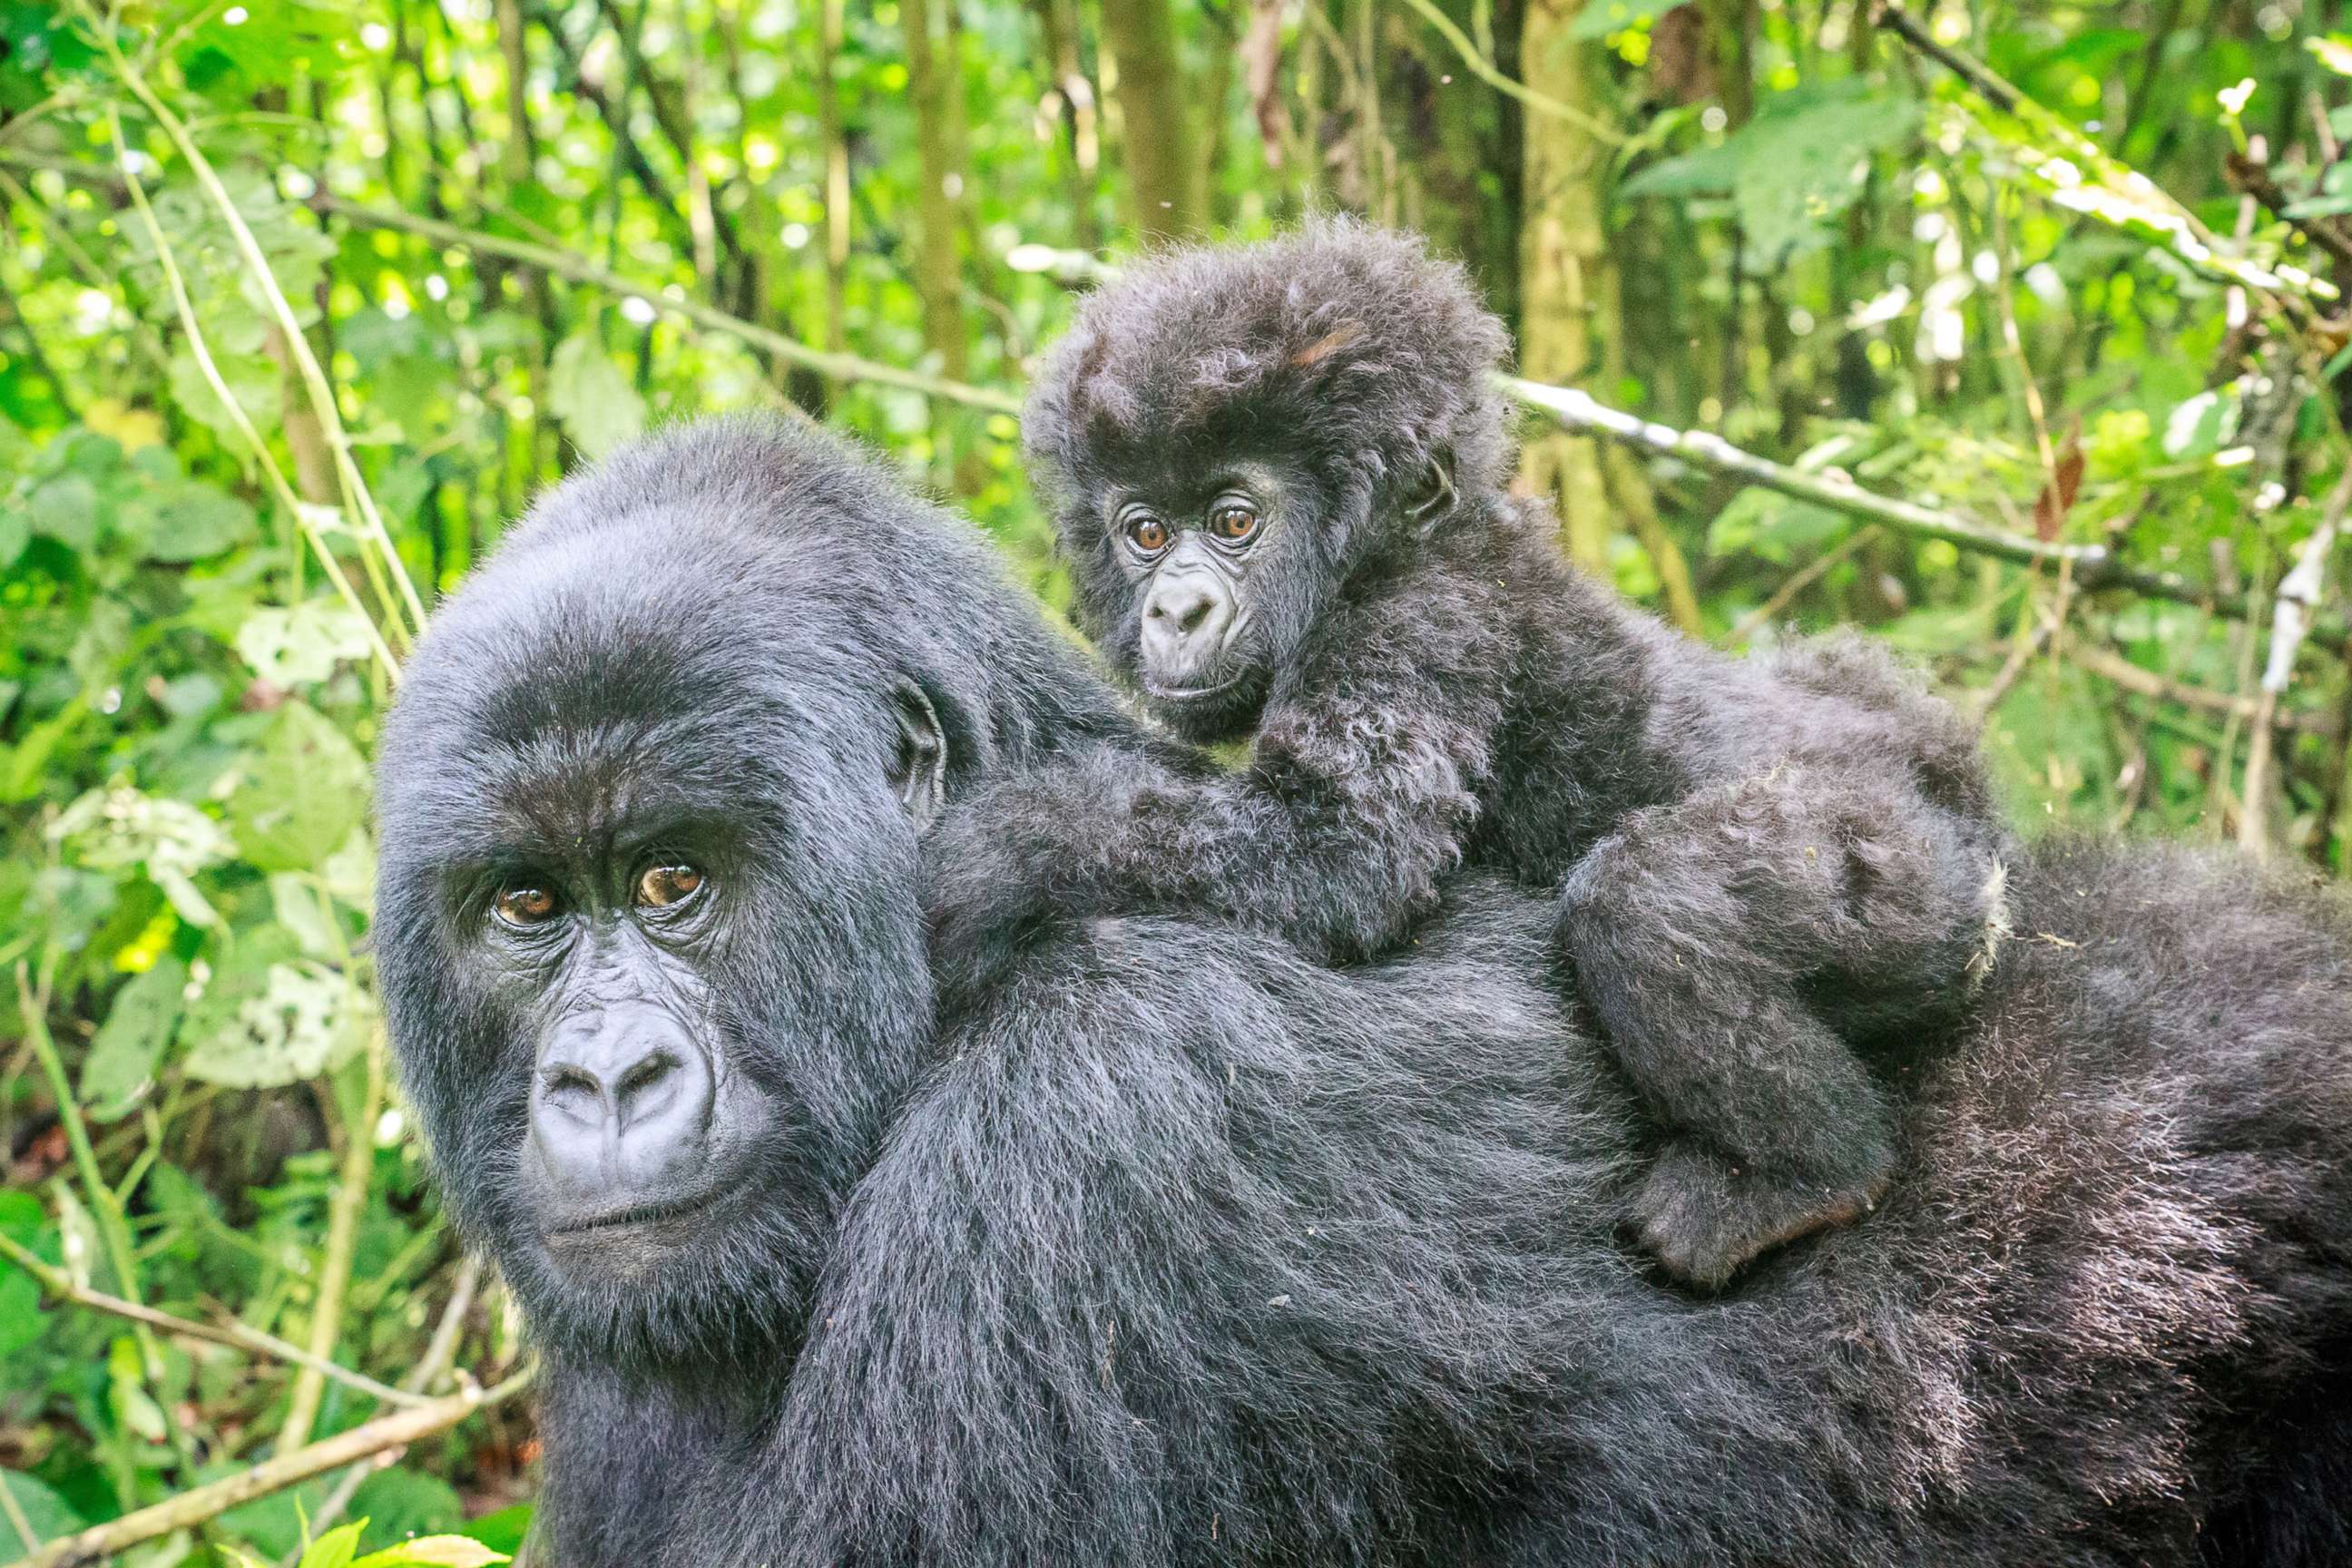 PHOTO: In this undated file photo, a baby Mountain gorilla sits on the back of his mother in the Virunga National Park, Democratic Republic Of Congo.